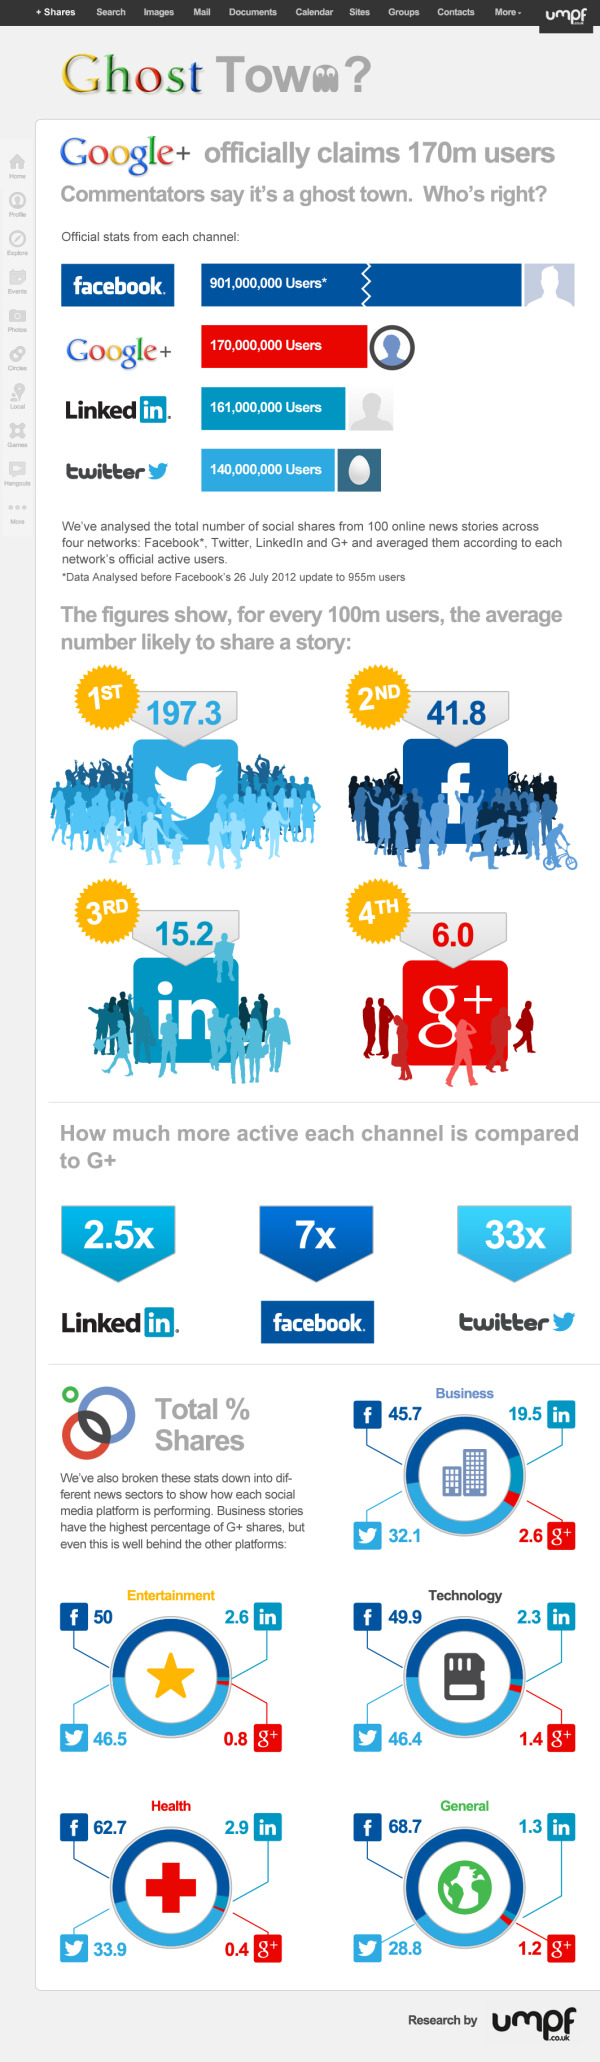 Is Google+ a Ghost Town? infographic